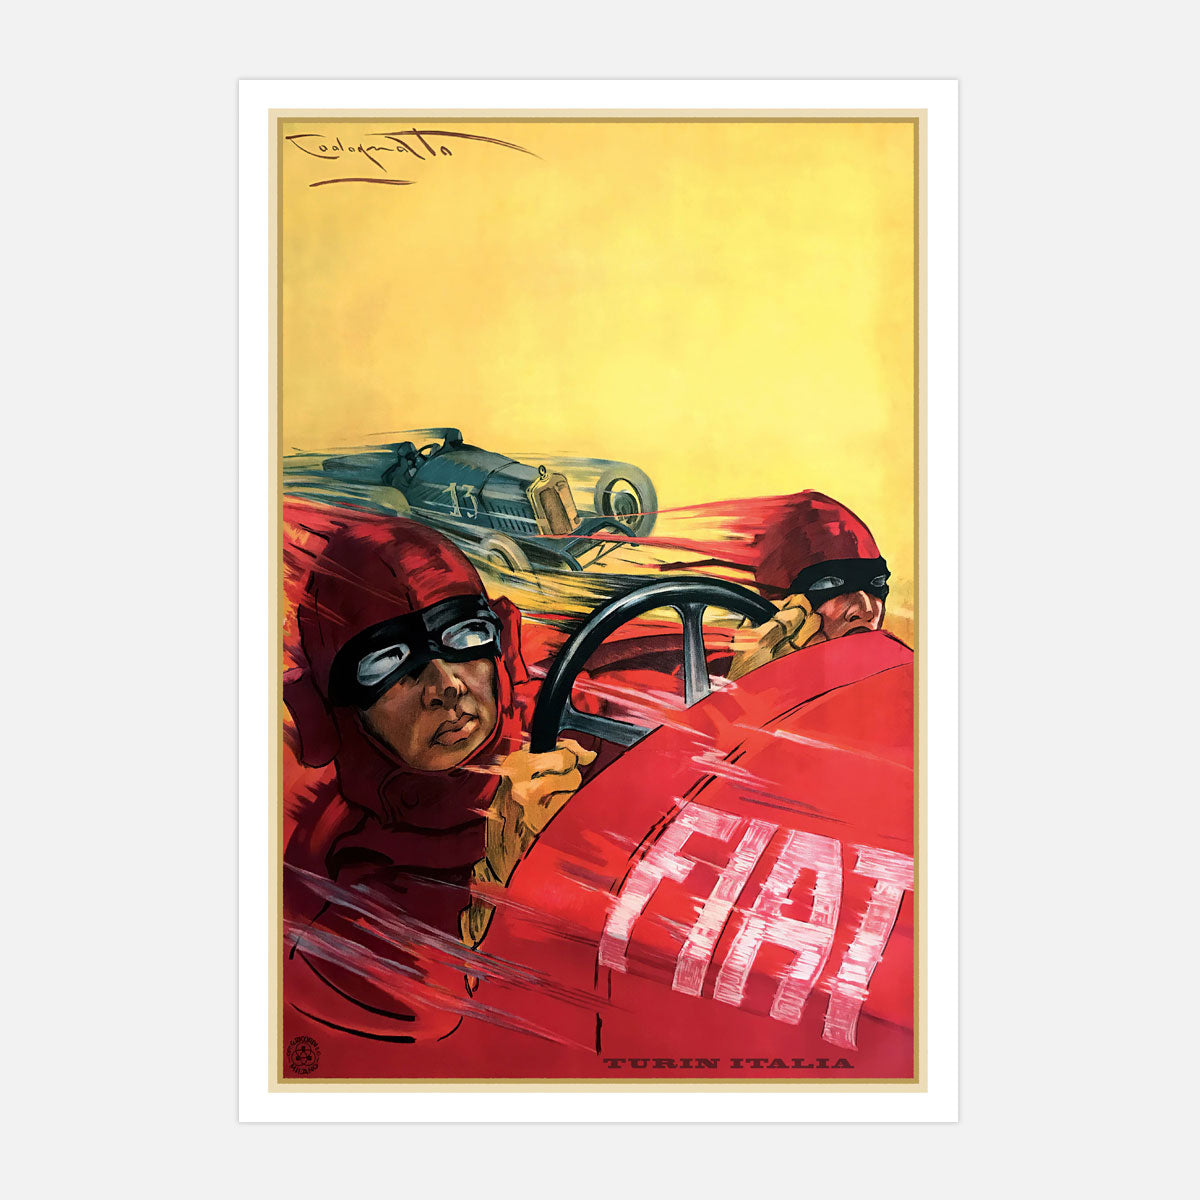 Fiat Italy vintage advertising poster from Places We Luv